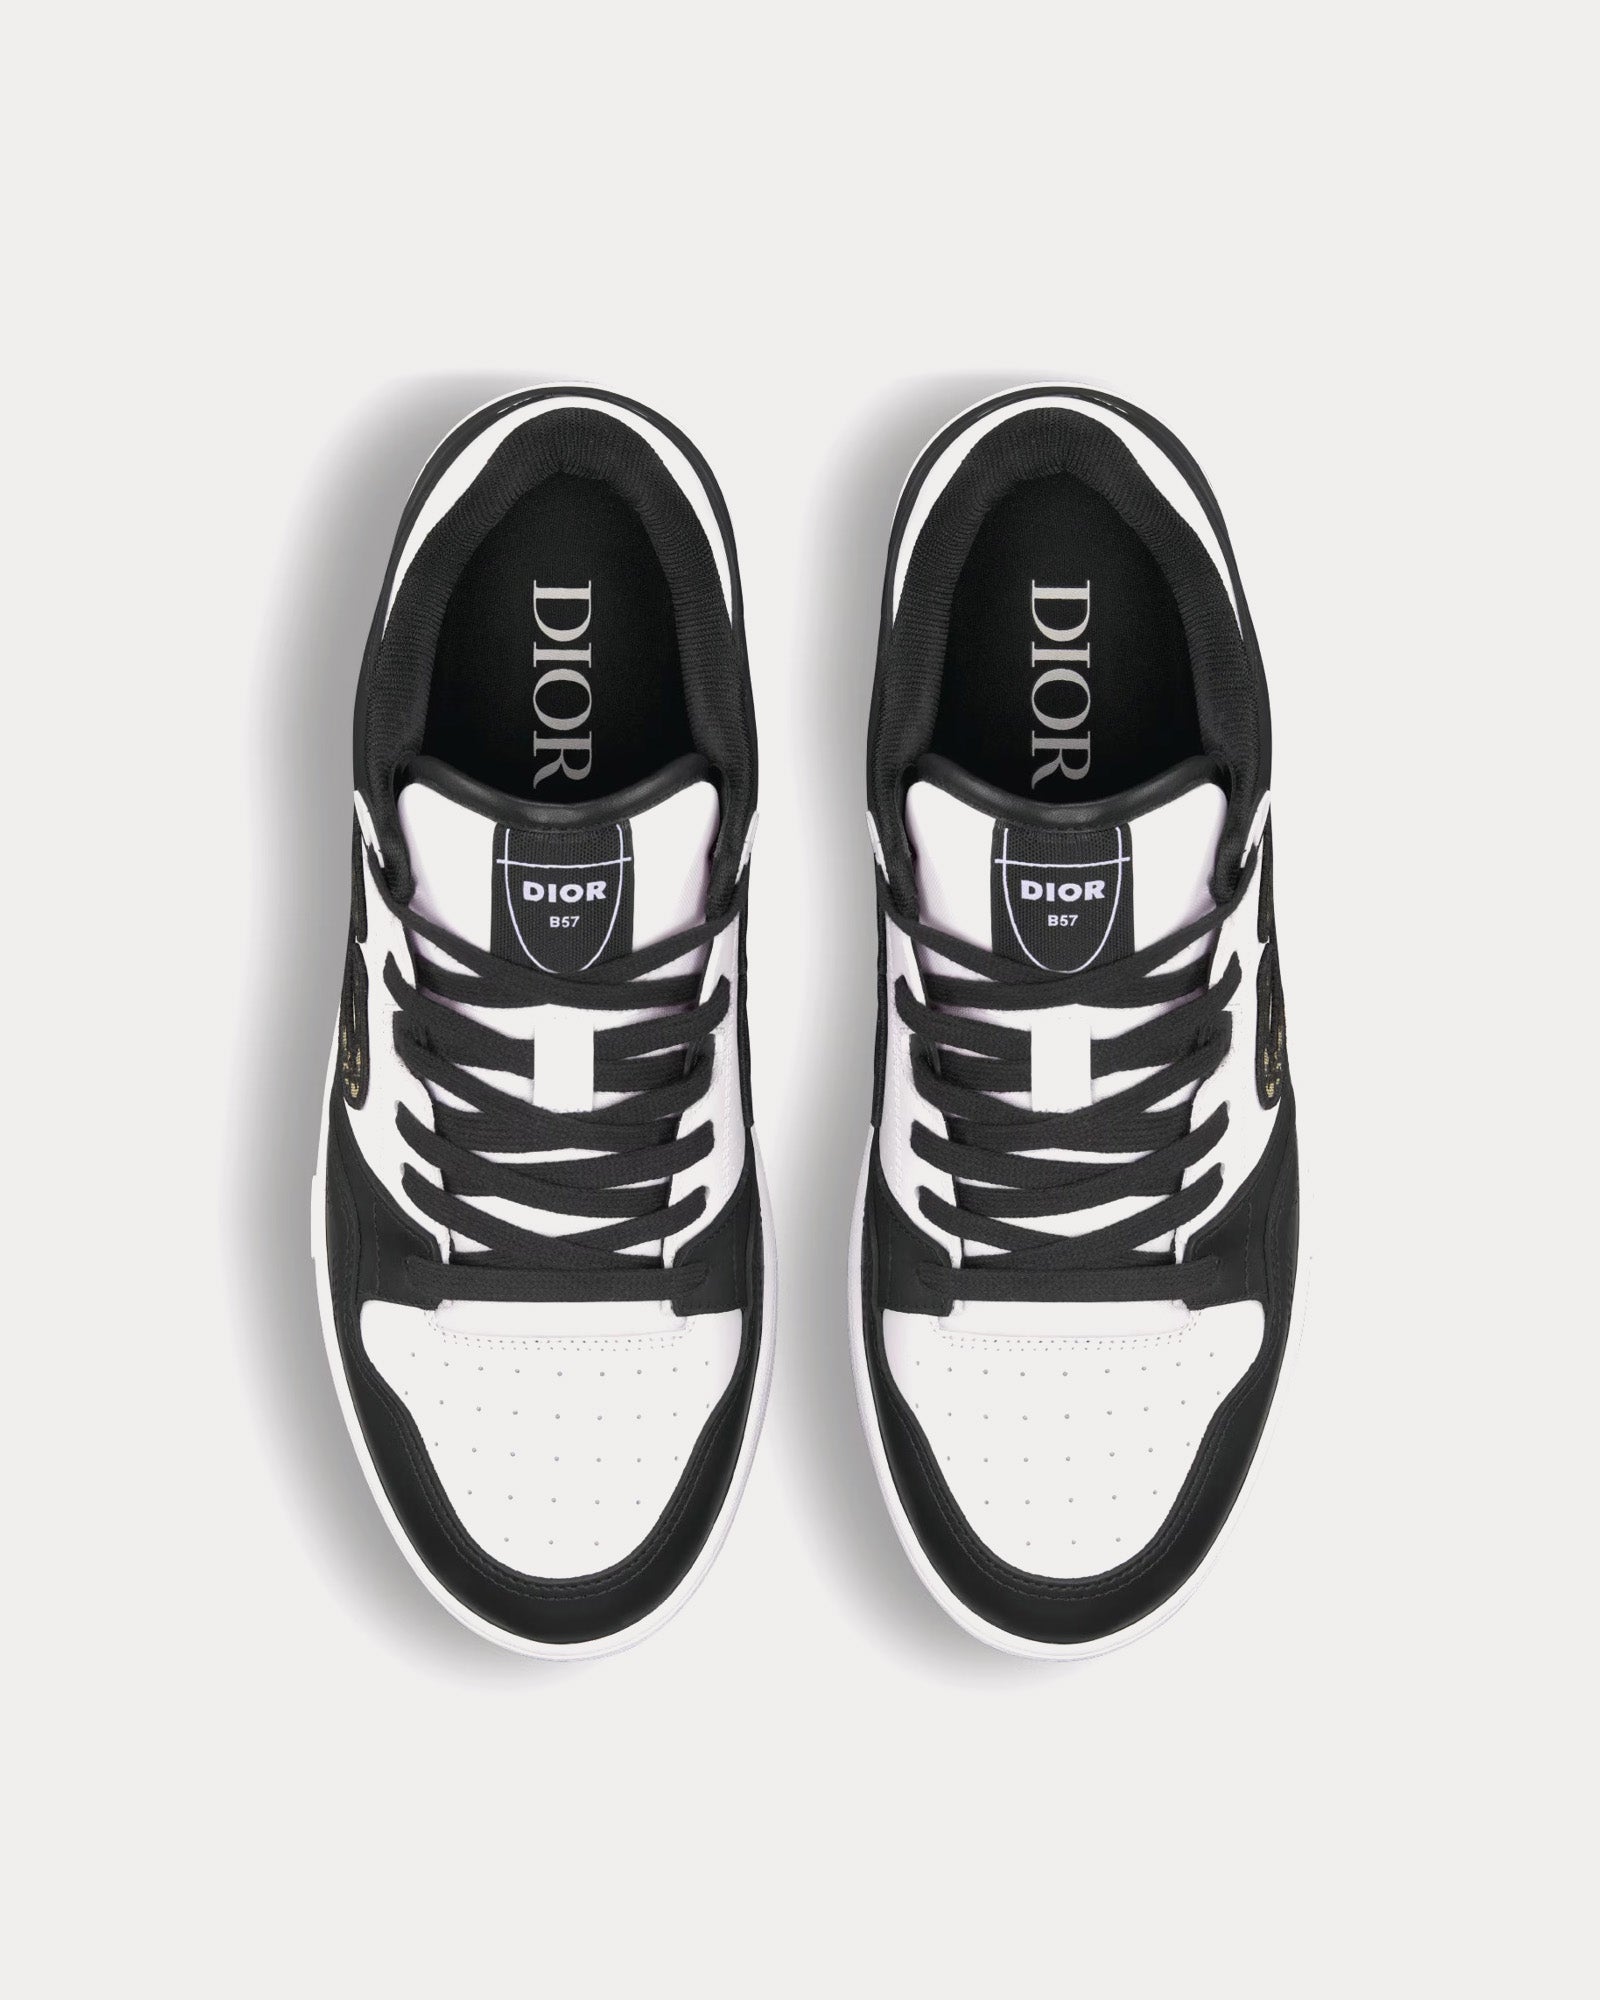 Dior - B57 Black and White Smooth Calfskin with Beige and Black Dior Oblique Jacquard Low Top Sneakers